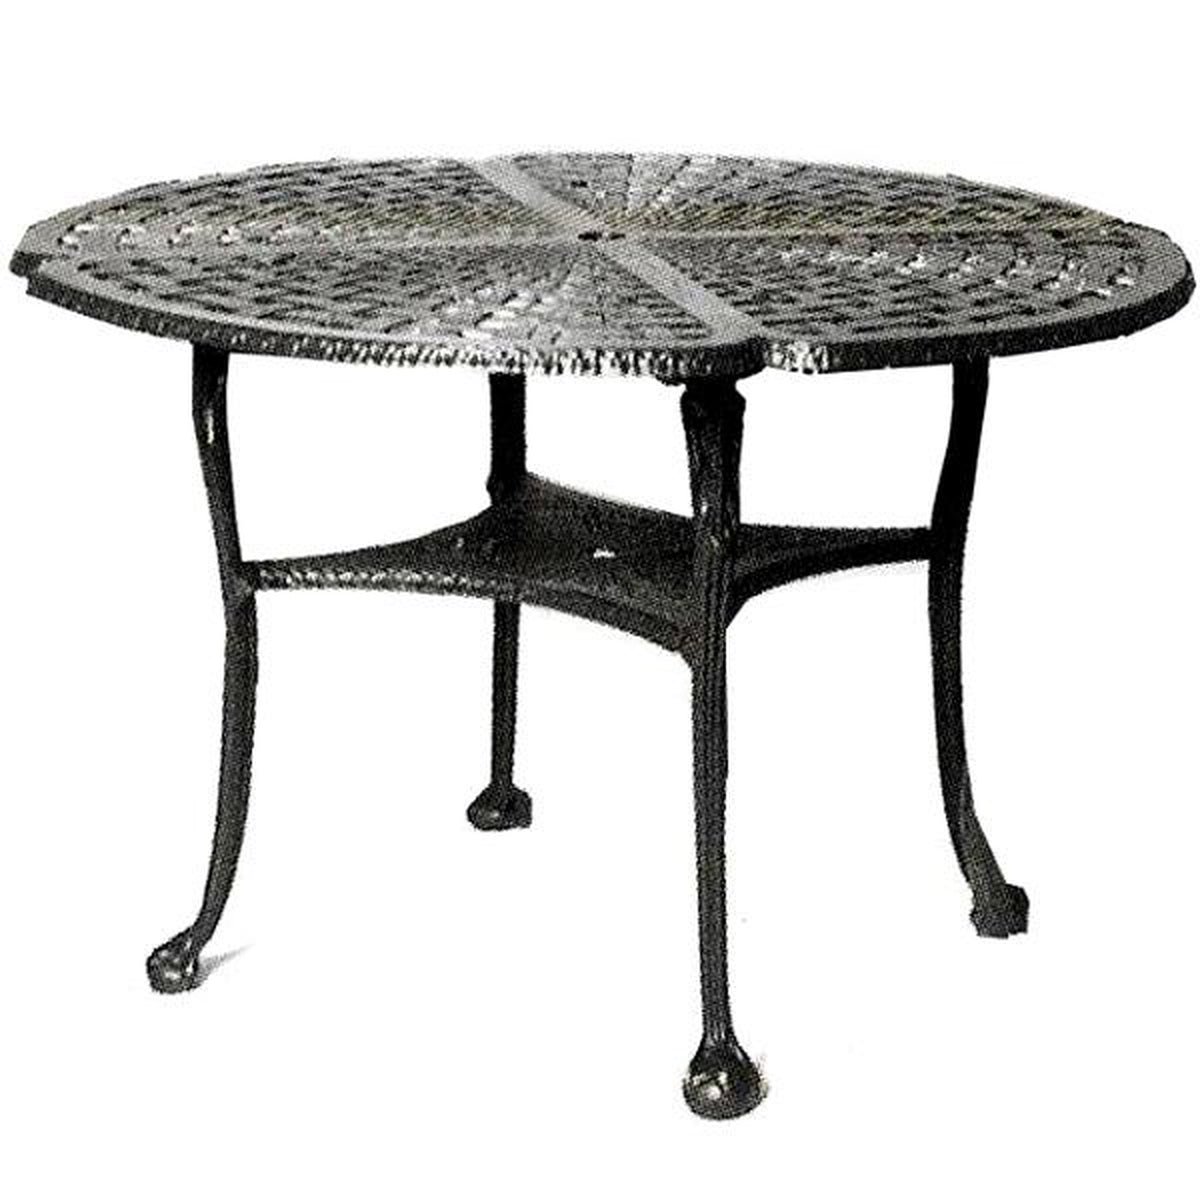 Basketweave Dining Table-Iron Accents